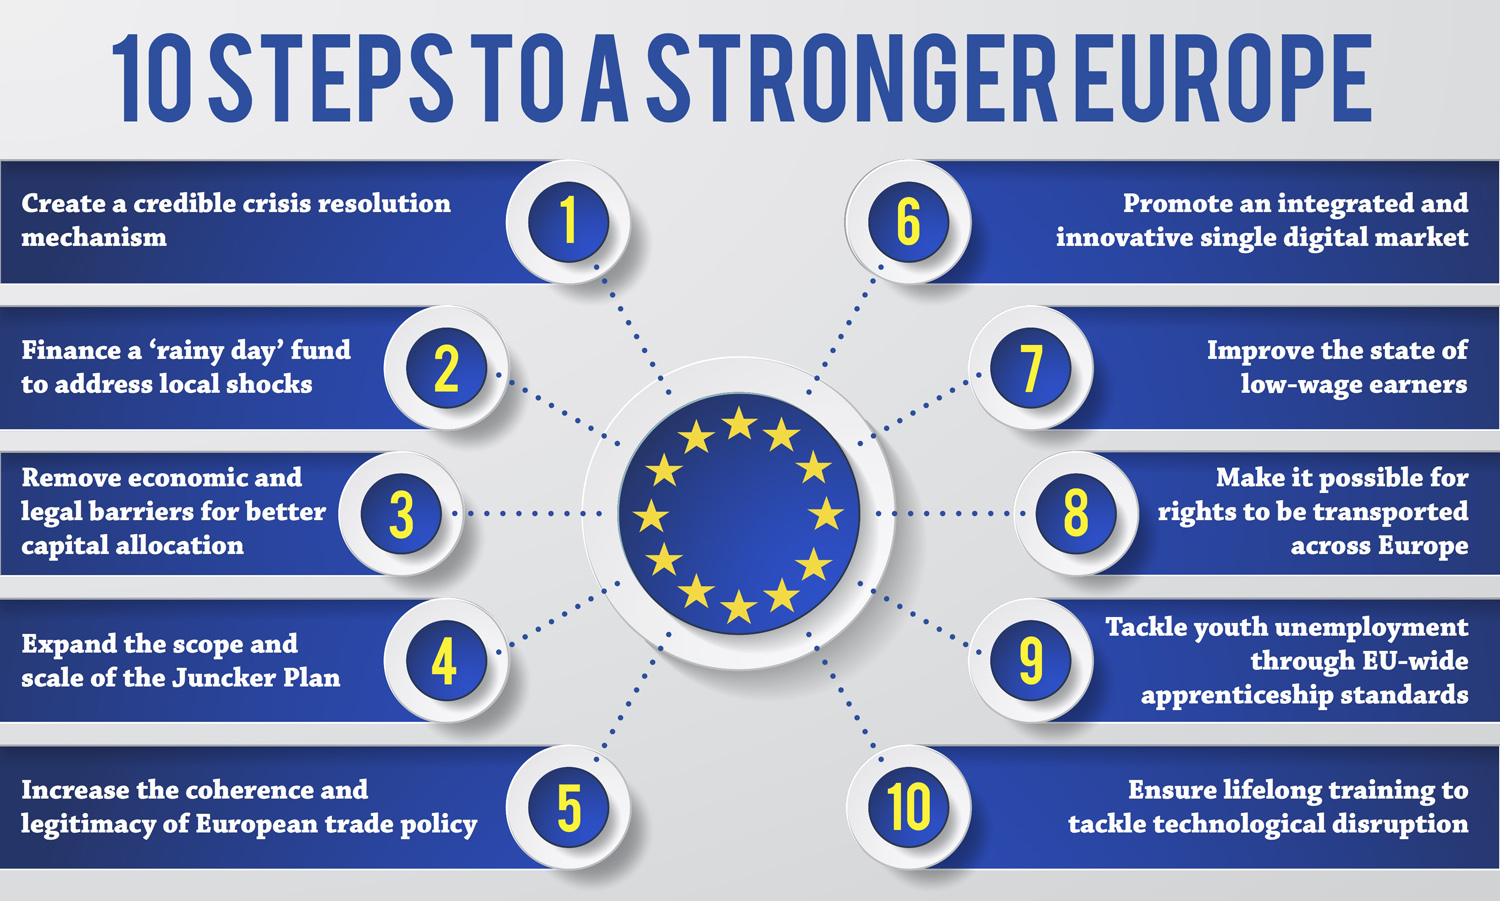 10 ideas for a stronger Europe